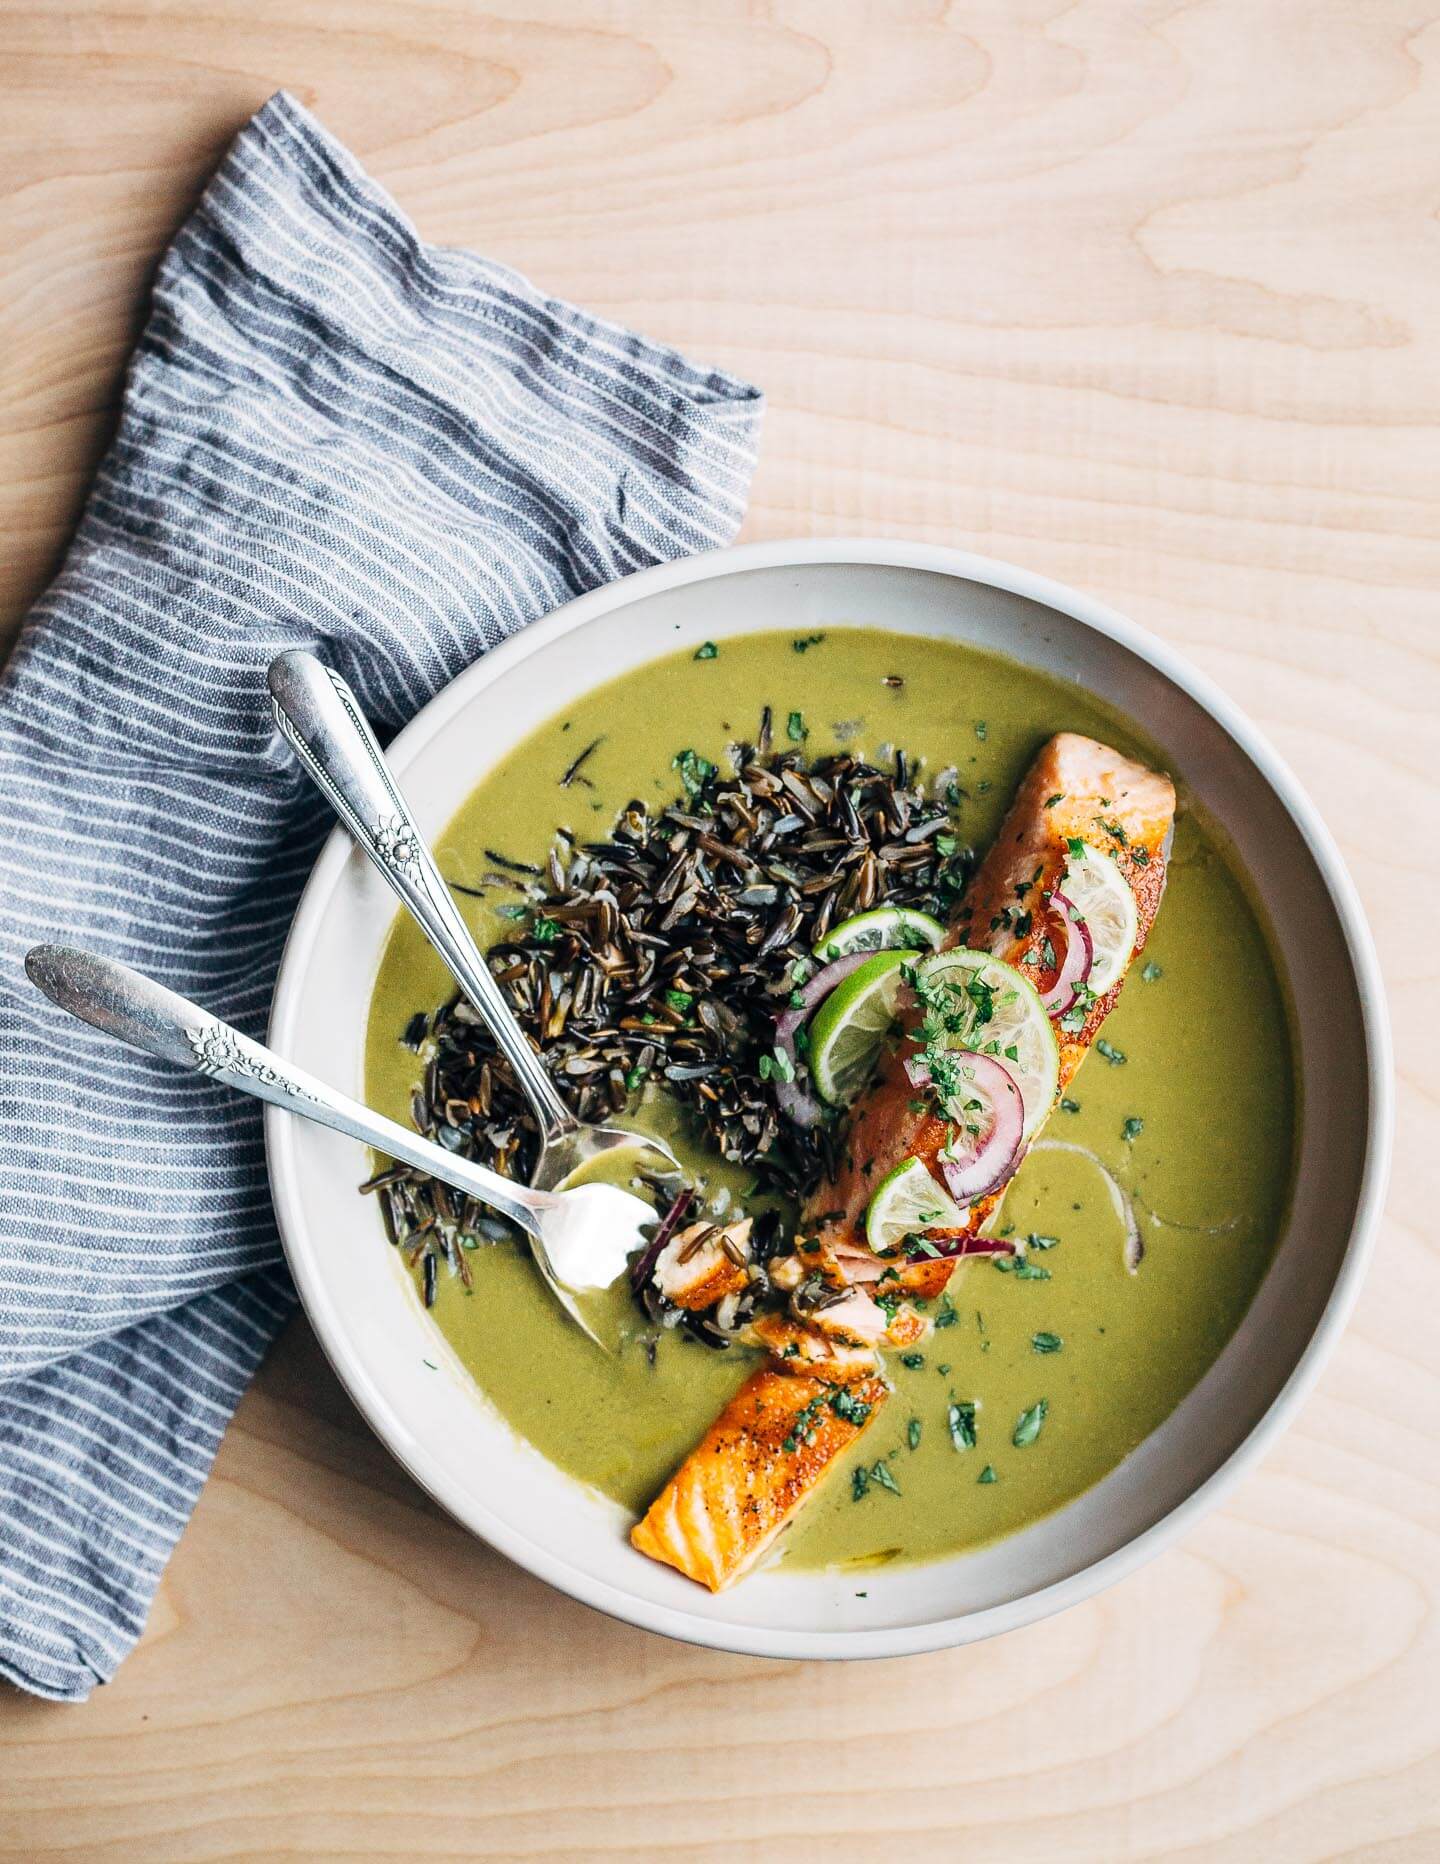 Nourishing green soup with creamy coconut milk and wild rice topped with a pan-seared salmon fillet.